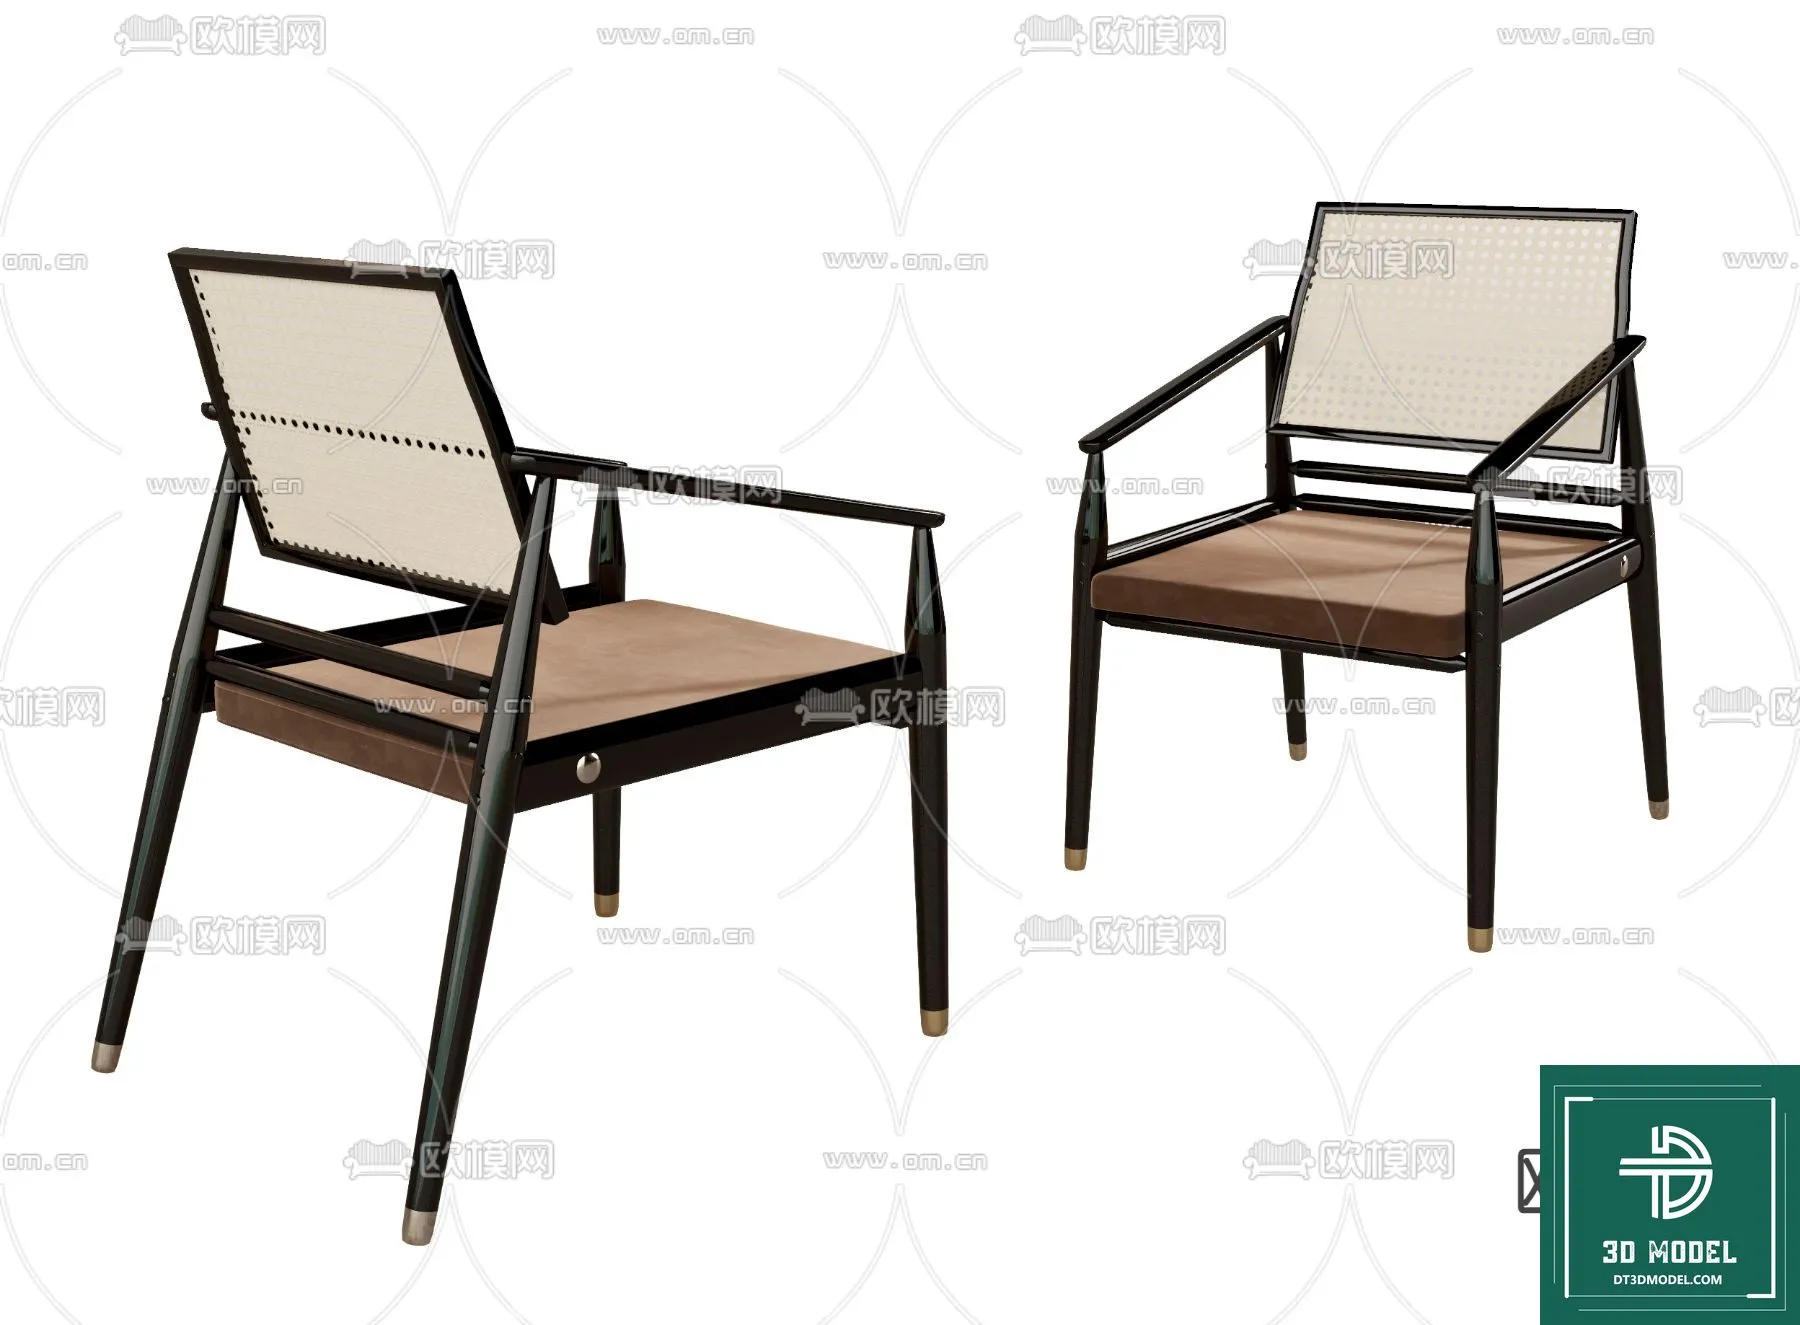 INDOCHINE STYLE – 3D MODELS – 604